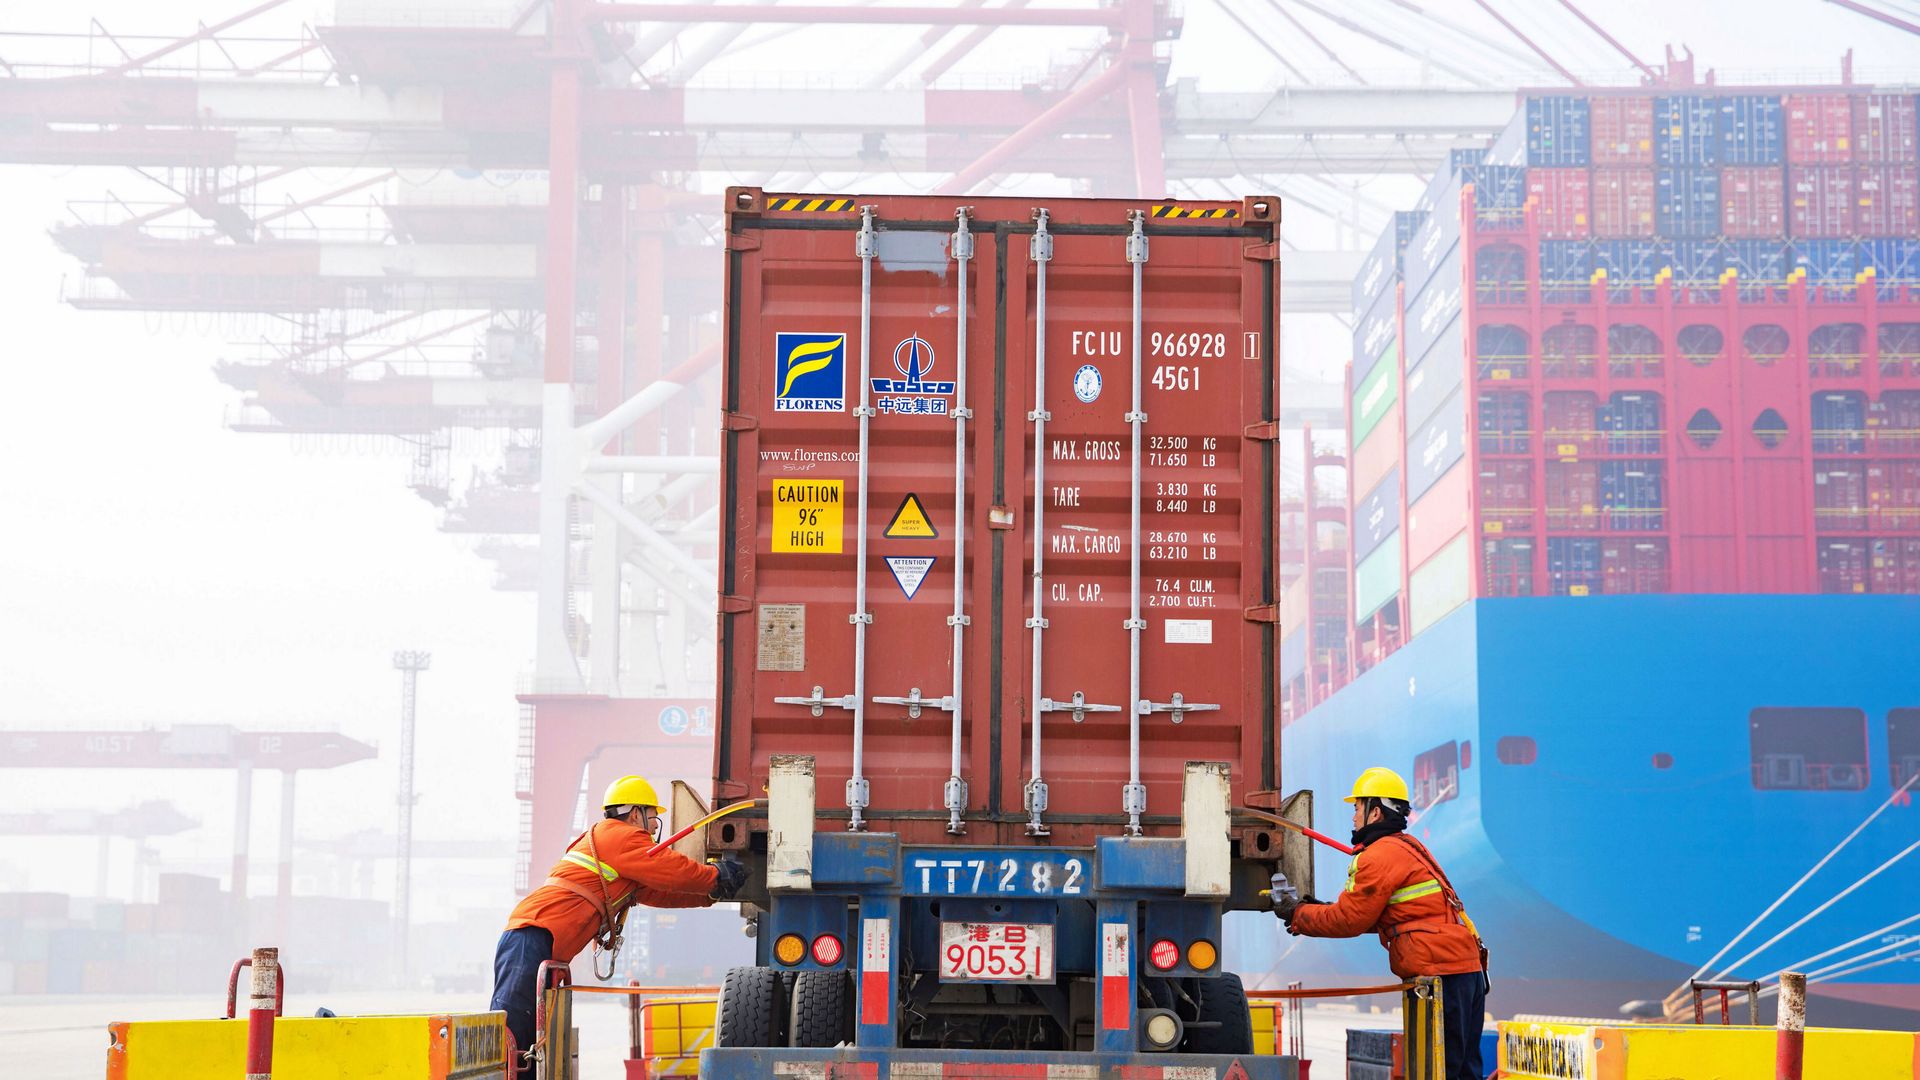 Workers check a shipping container on a truck at Qingdao Port on January 14, 2019 in Qingdao, Shandong Province of China